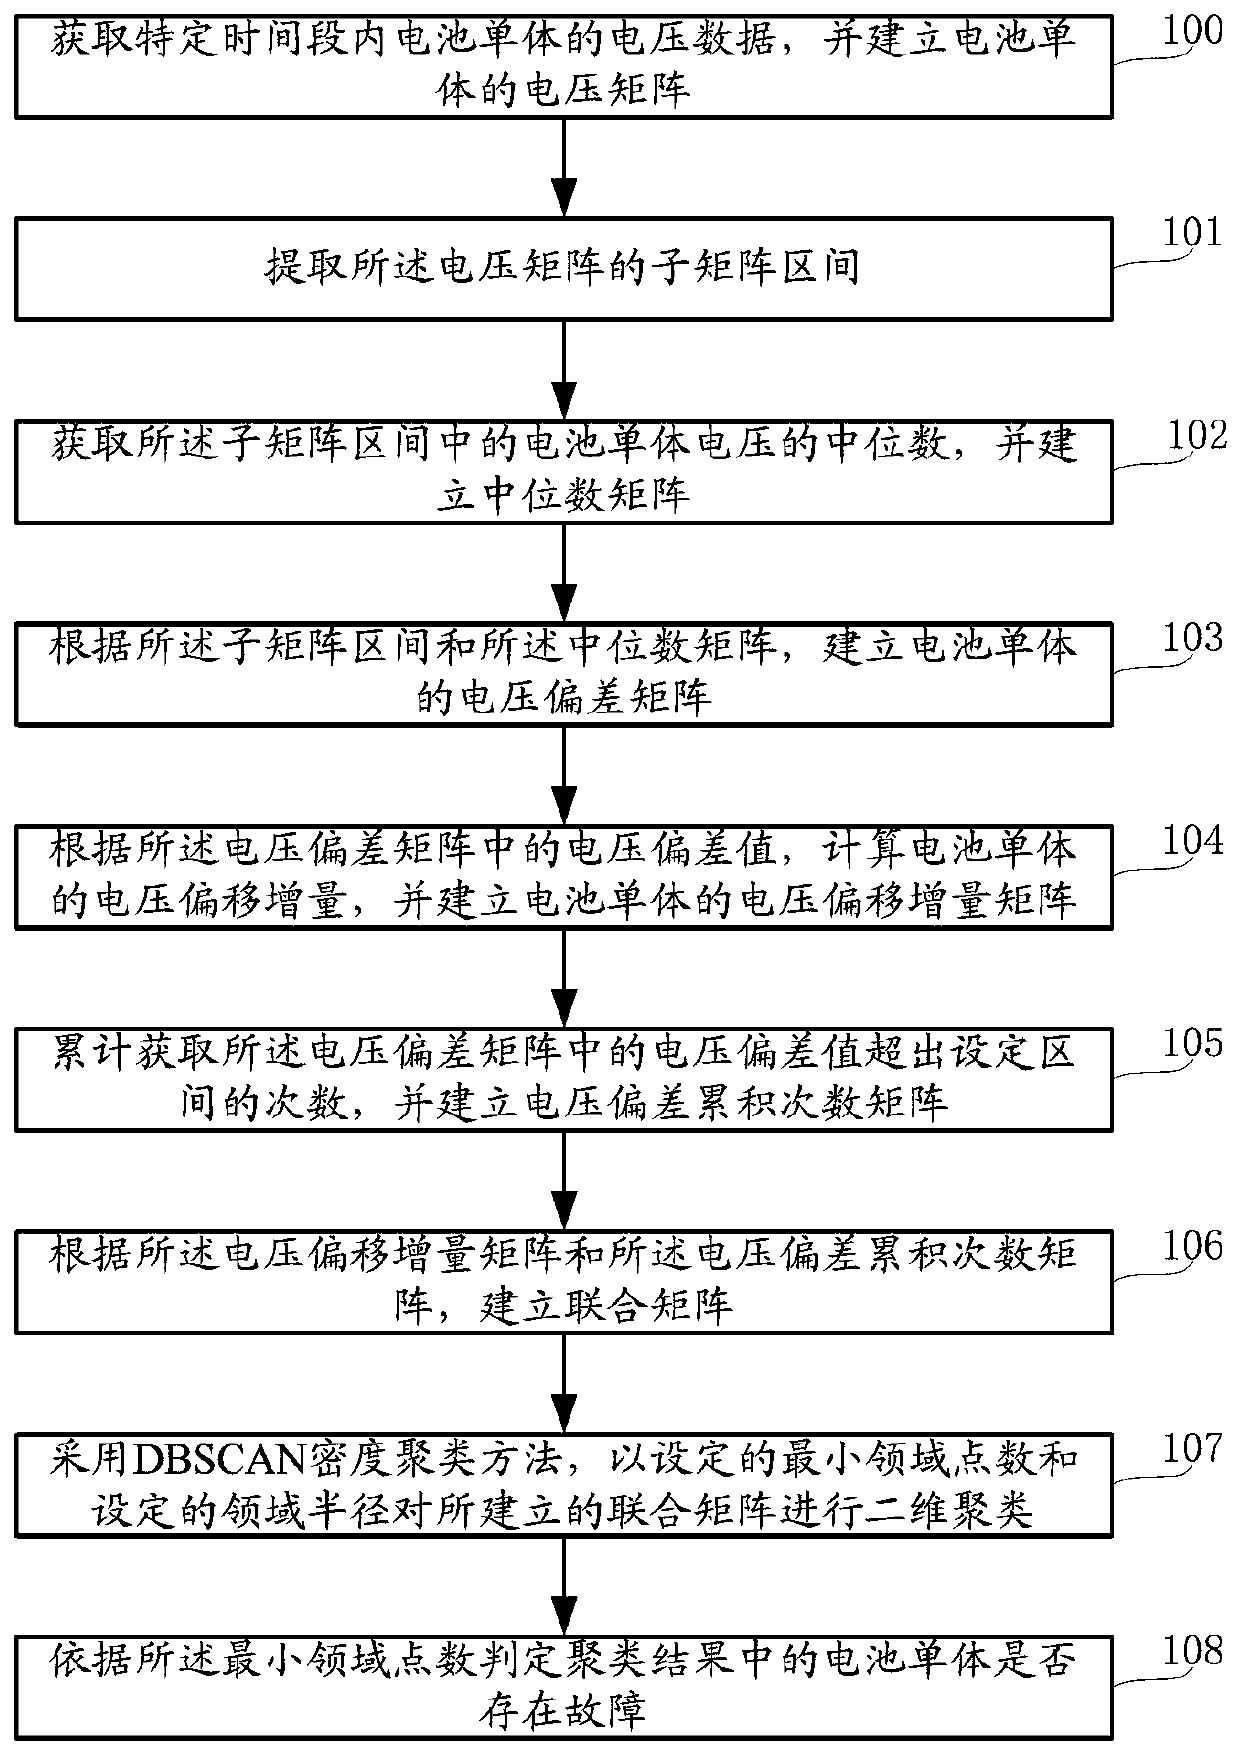 Power battery fault diagnosis method and system